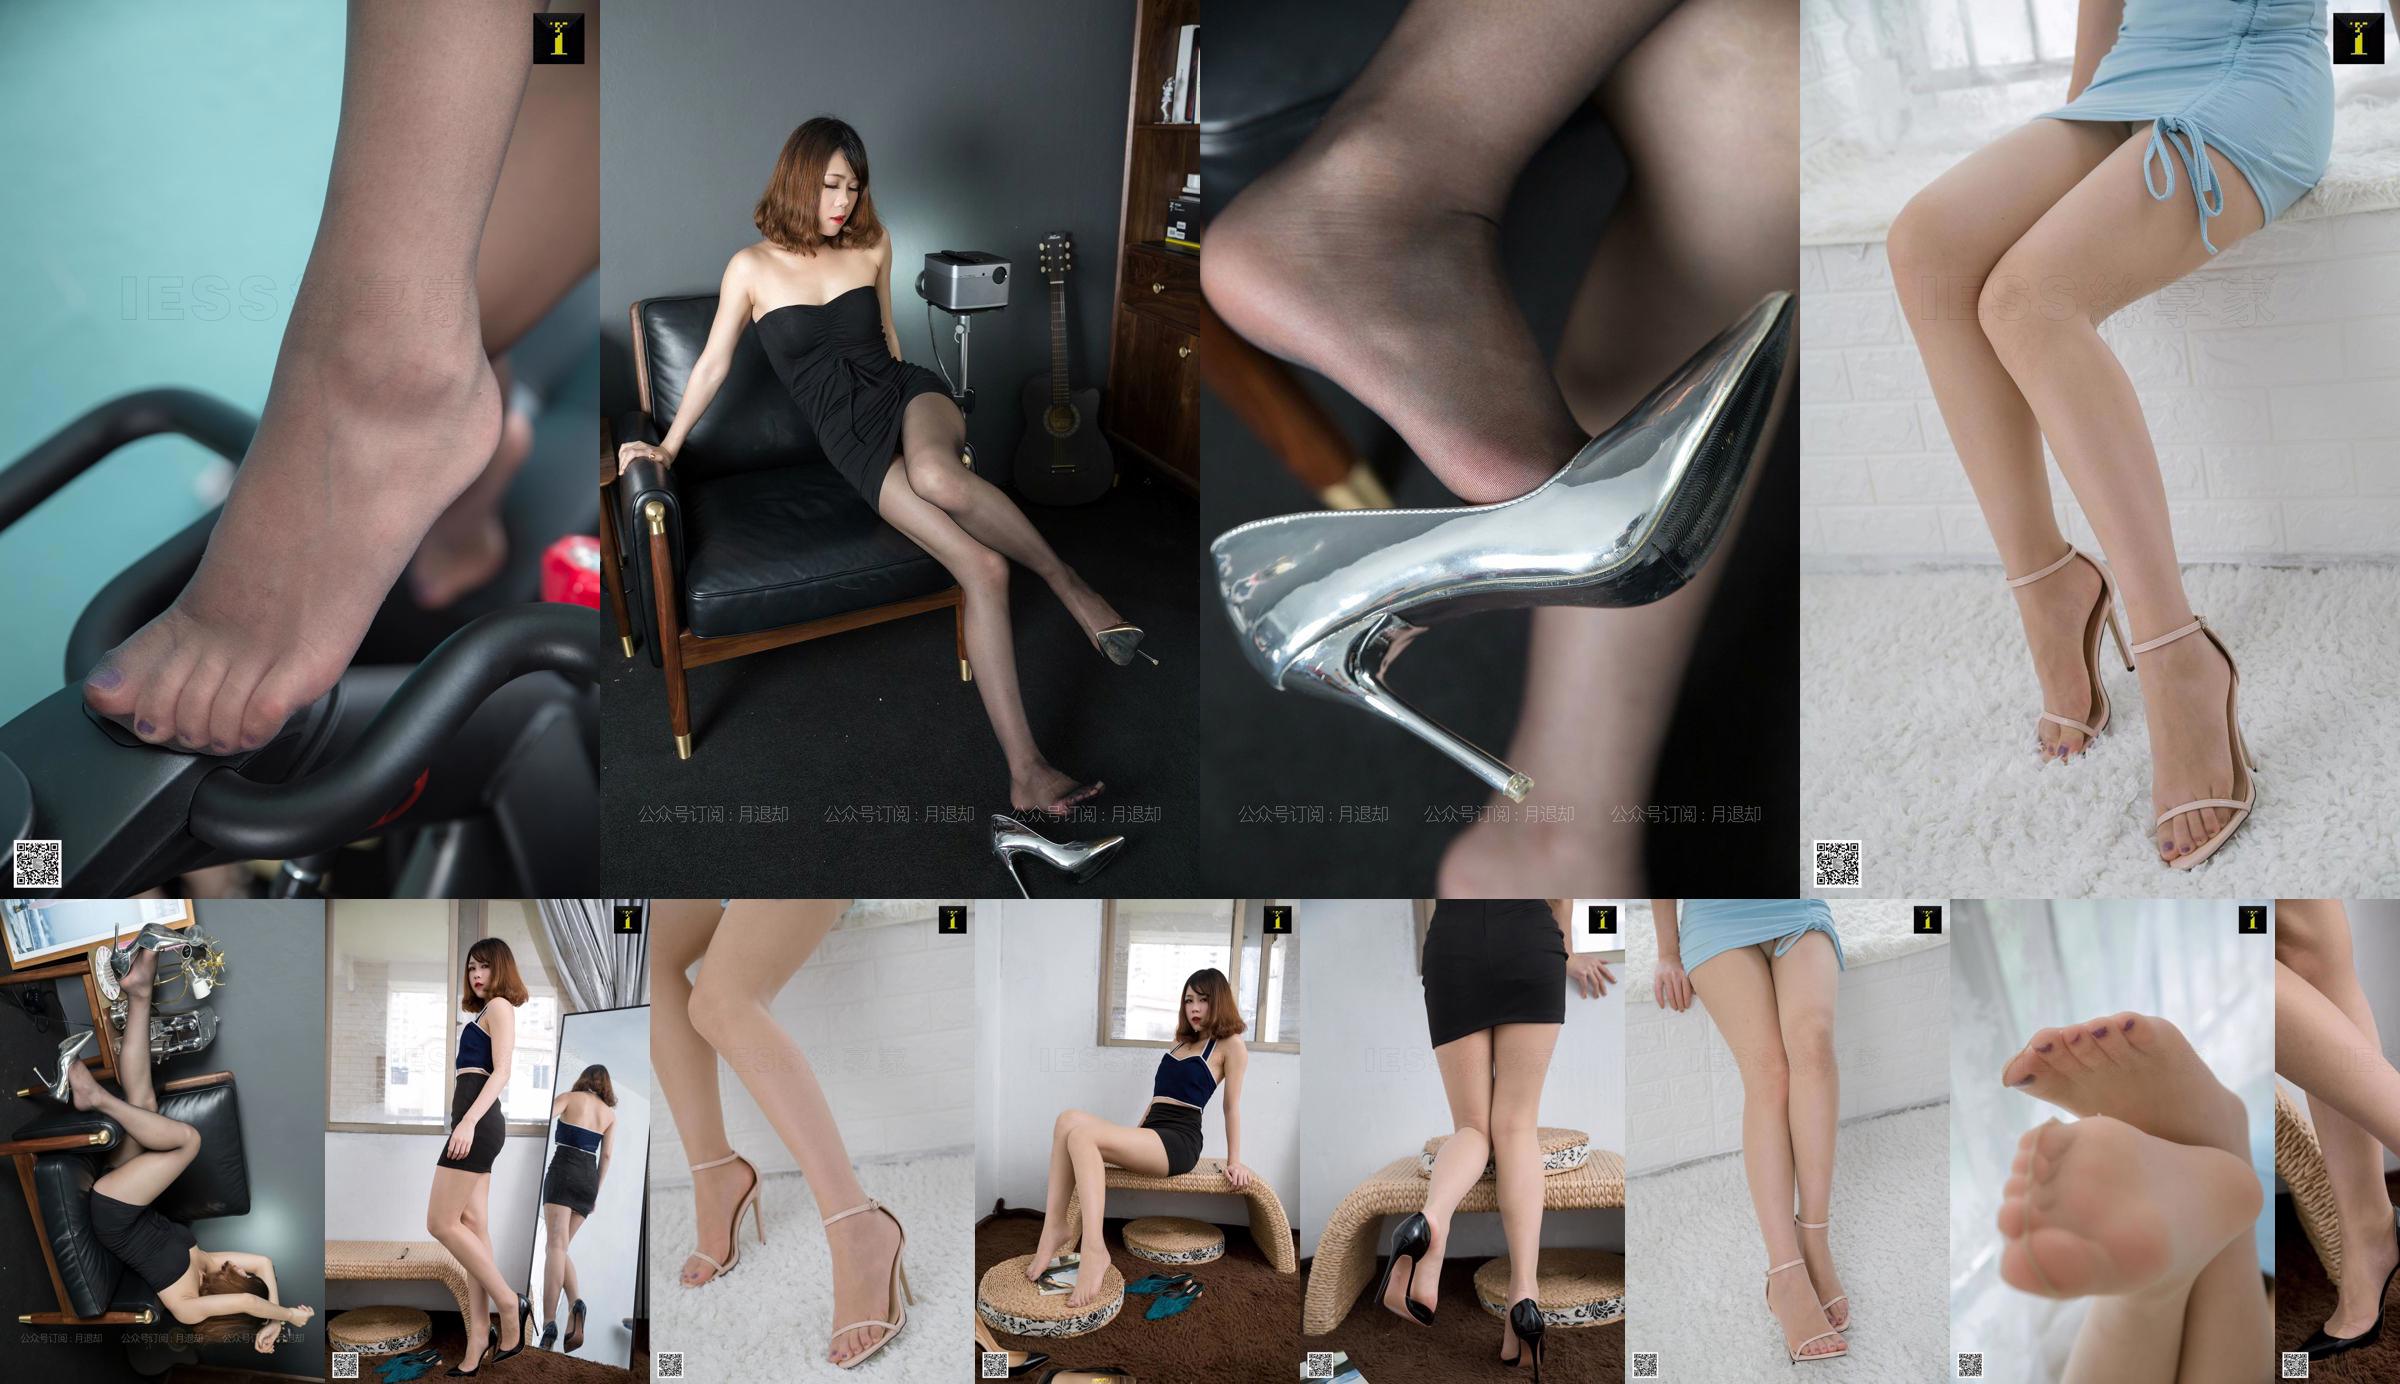 Model Diudiu "The Magic of Super Shallow Mouth and High Heels" [IESS Weixiang] Beautiful legs in stockings No.d5b0e4 Page 6